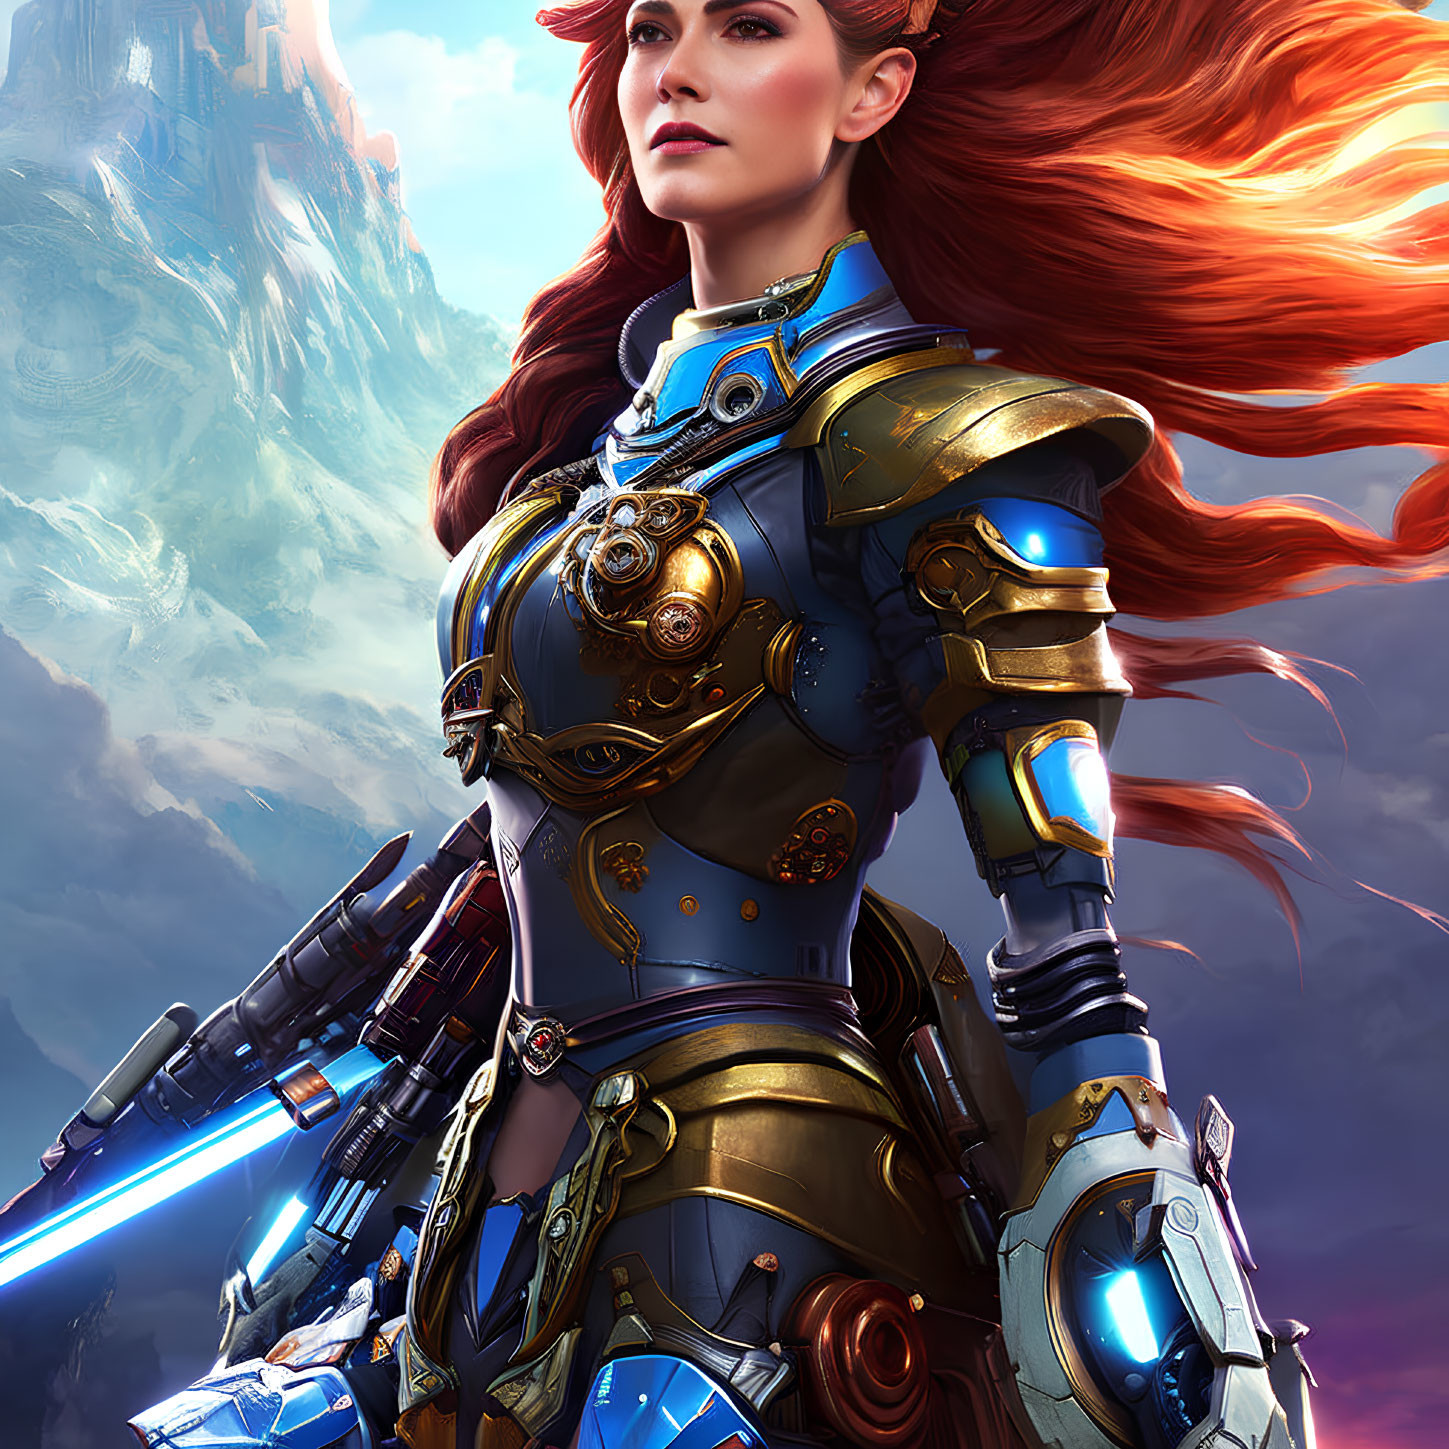 Red-haired female warrior in blue and gold armor with high-tech gauntlet.